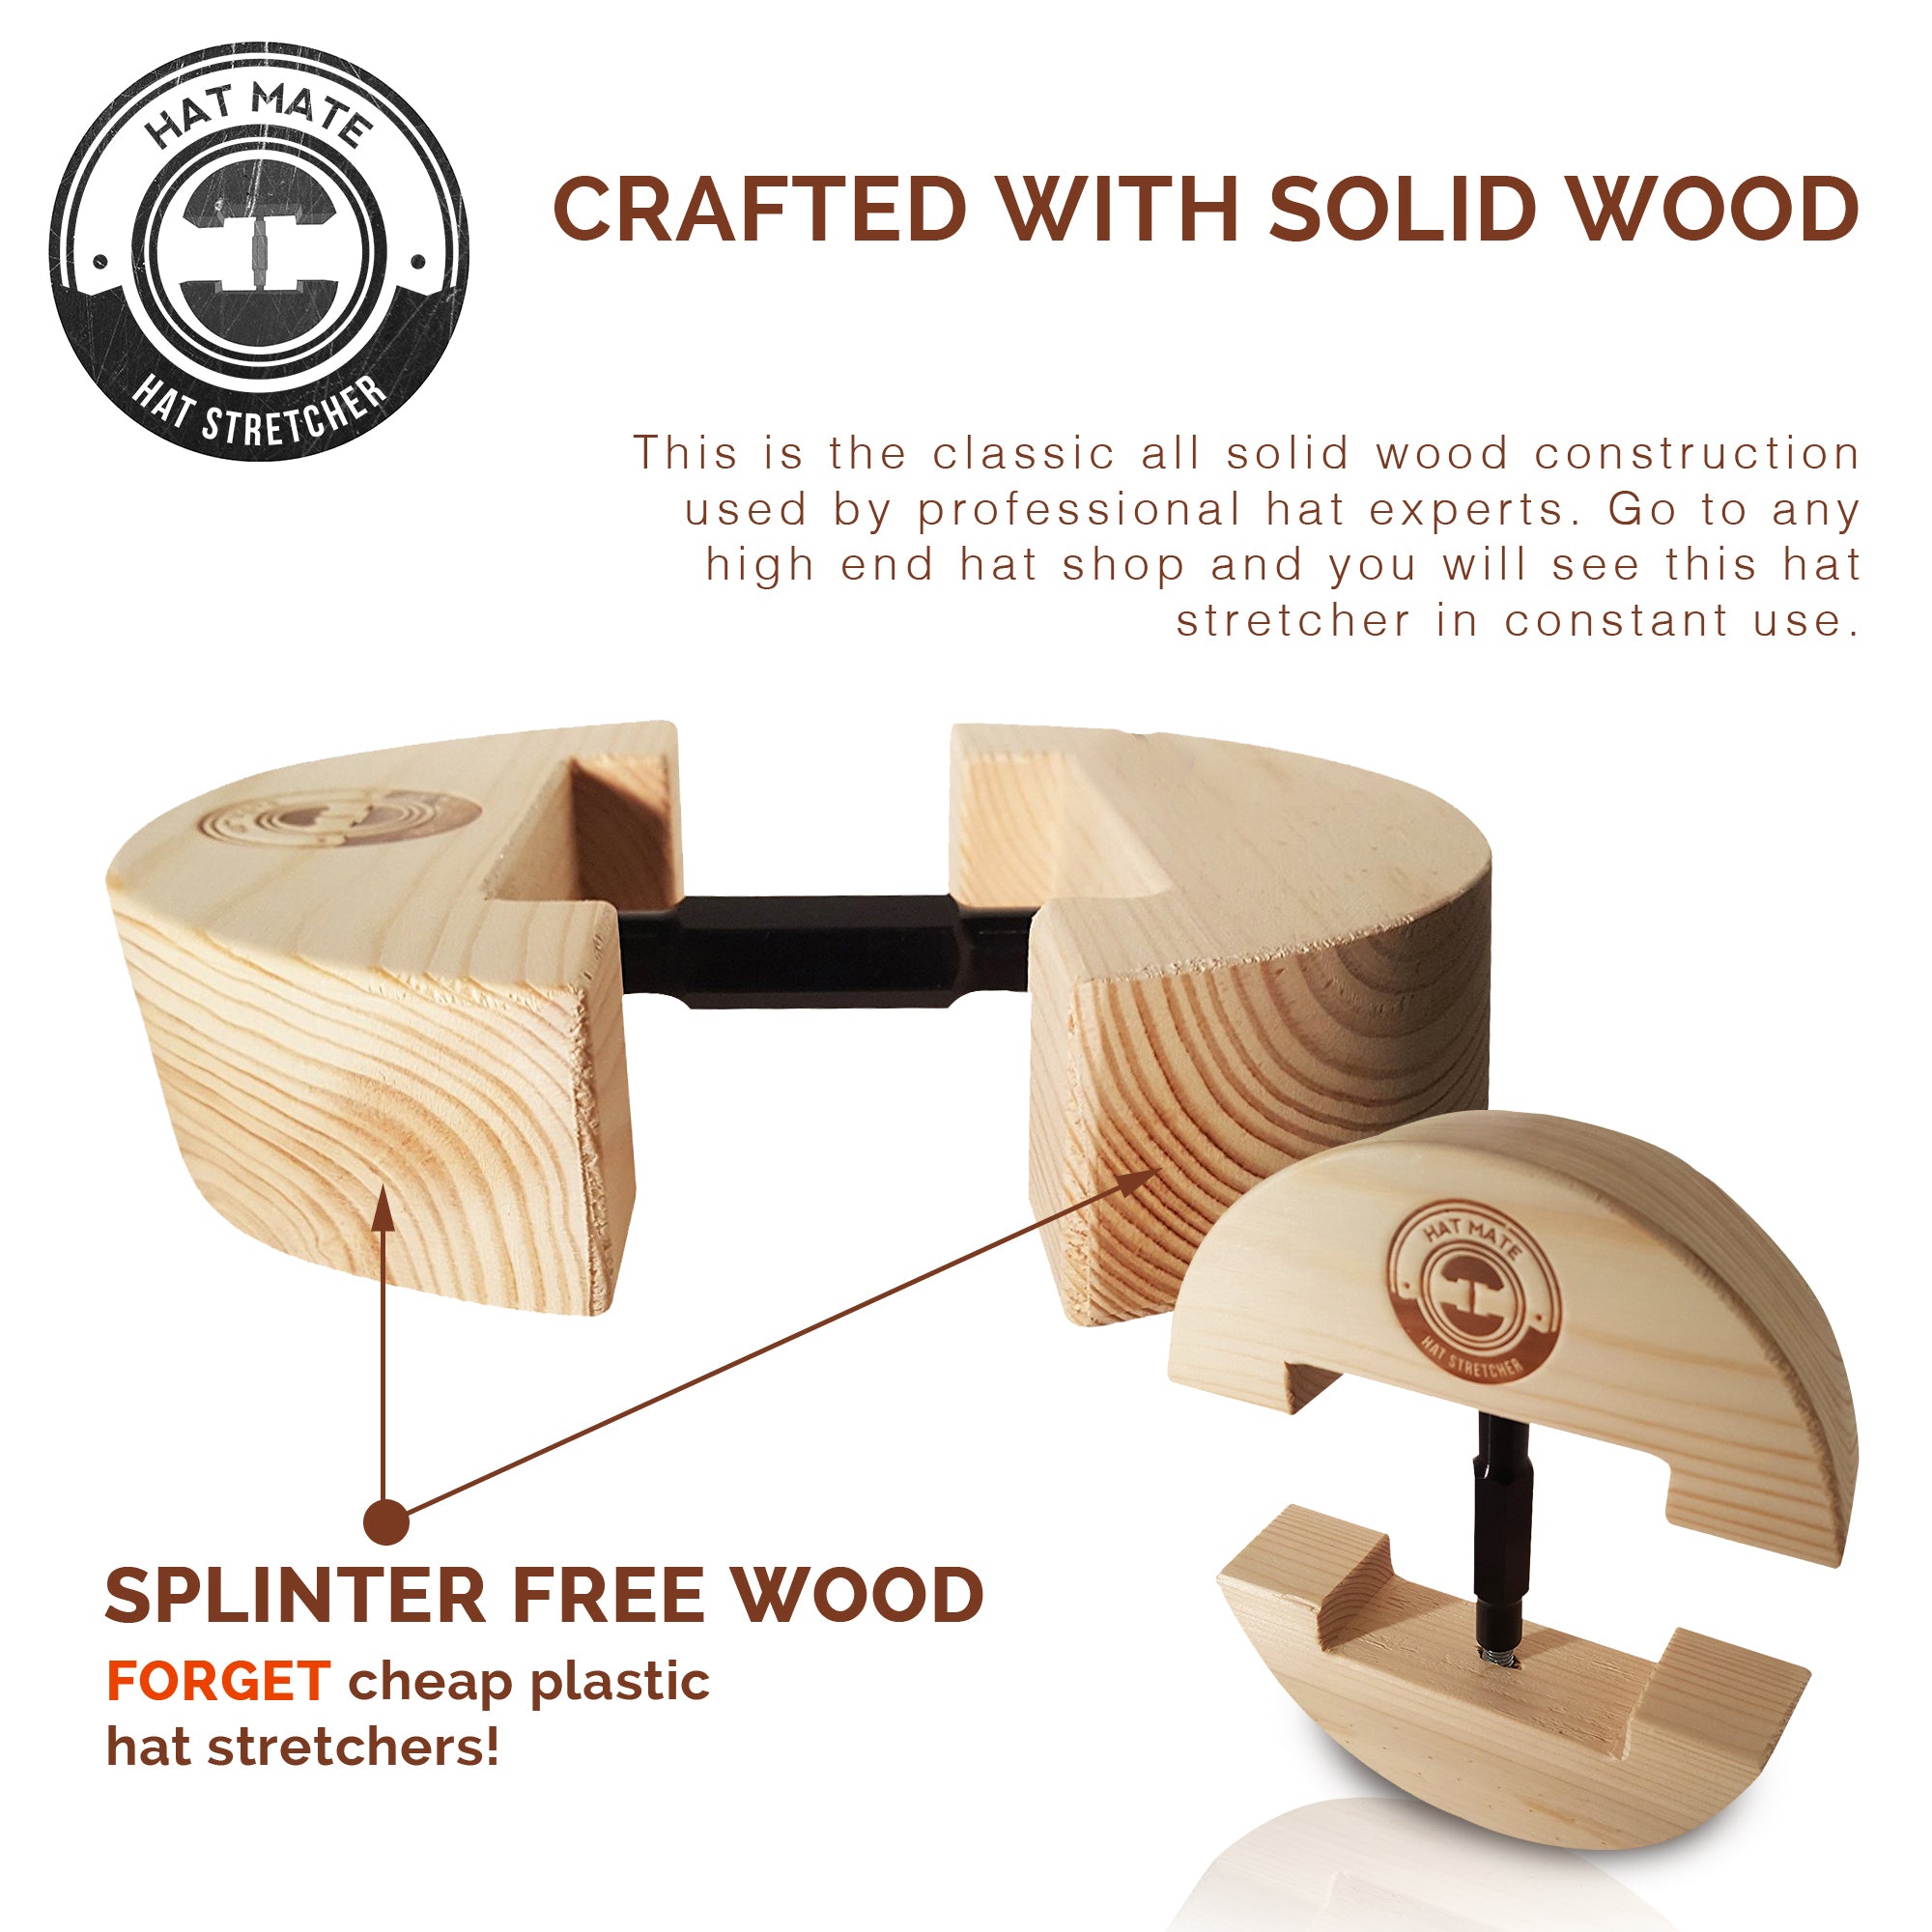 Crafted With Solid Wood